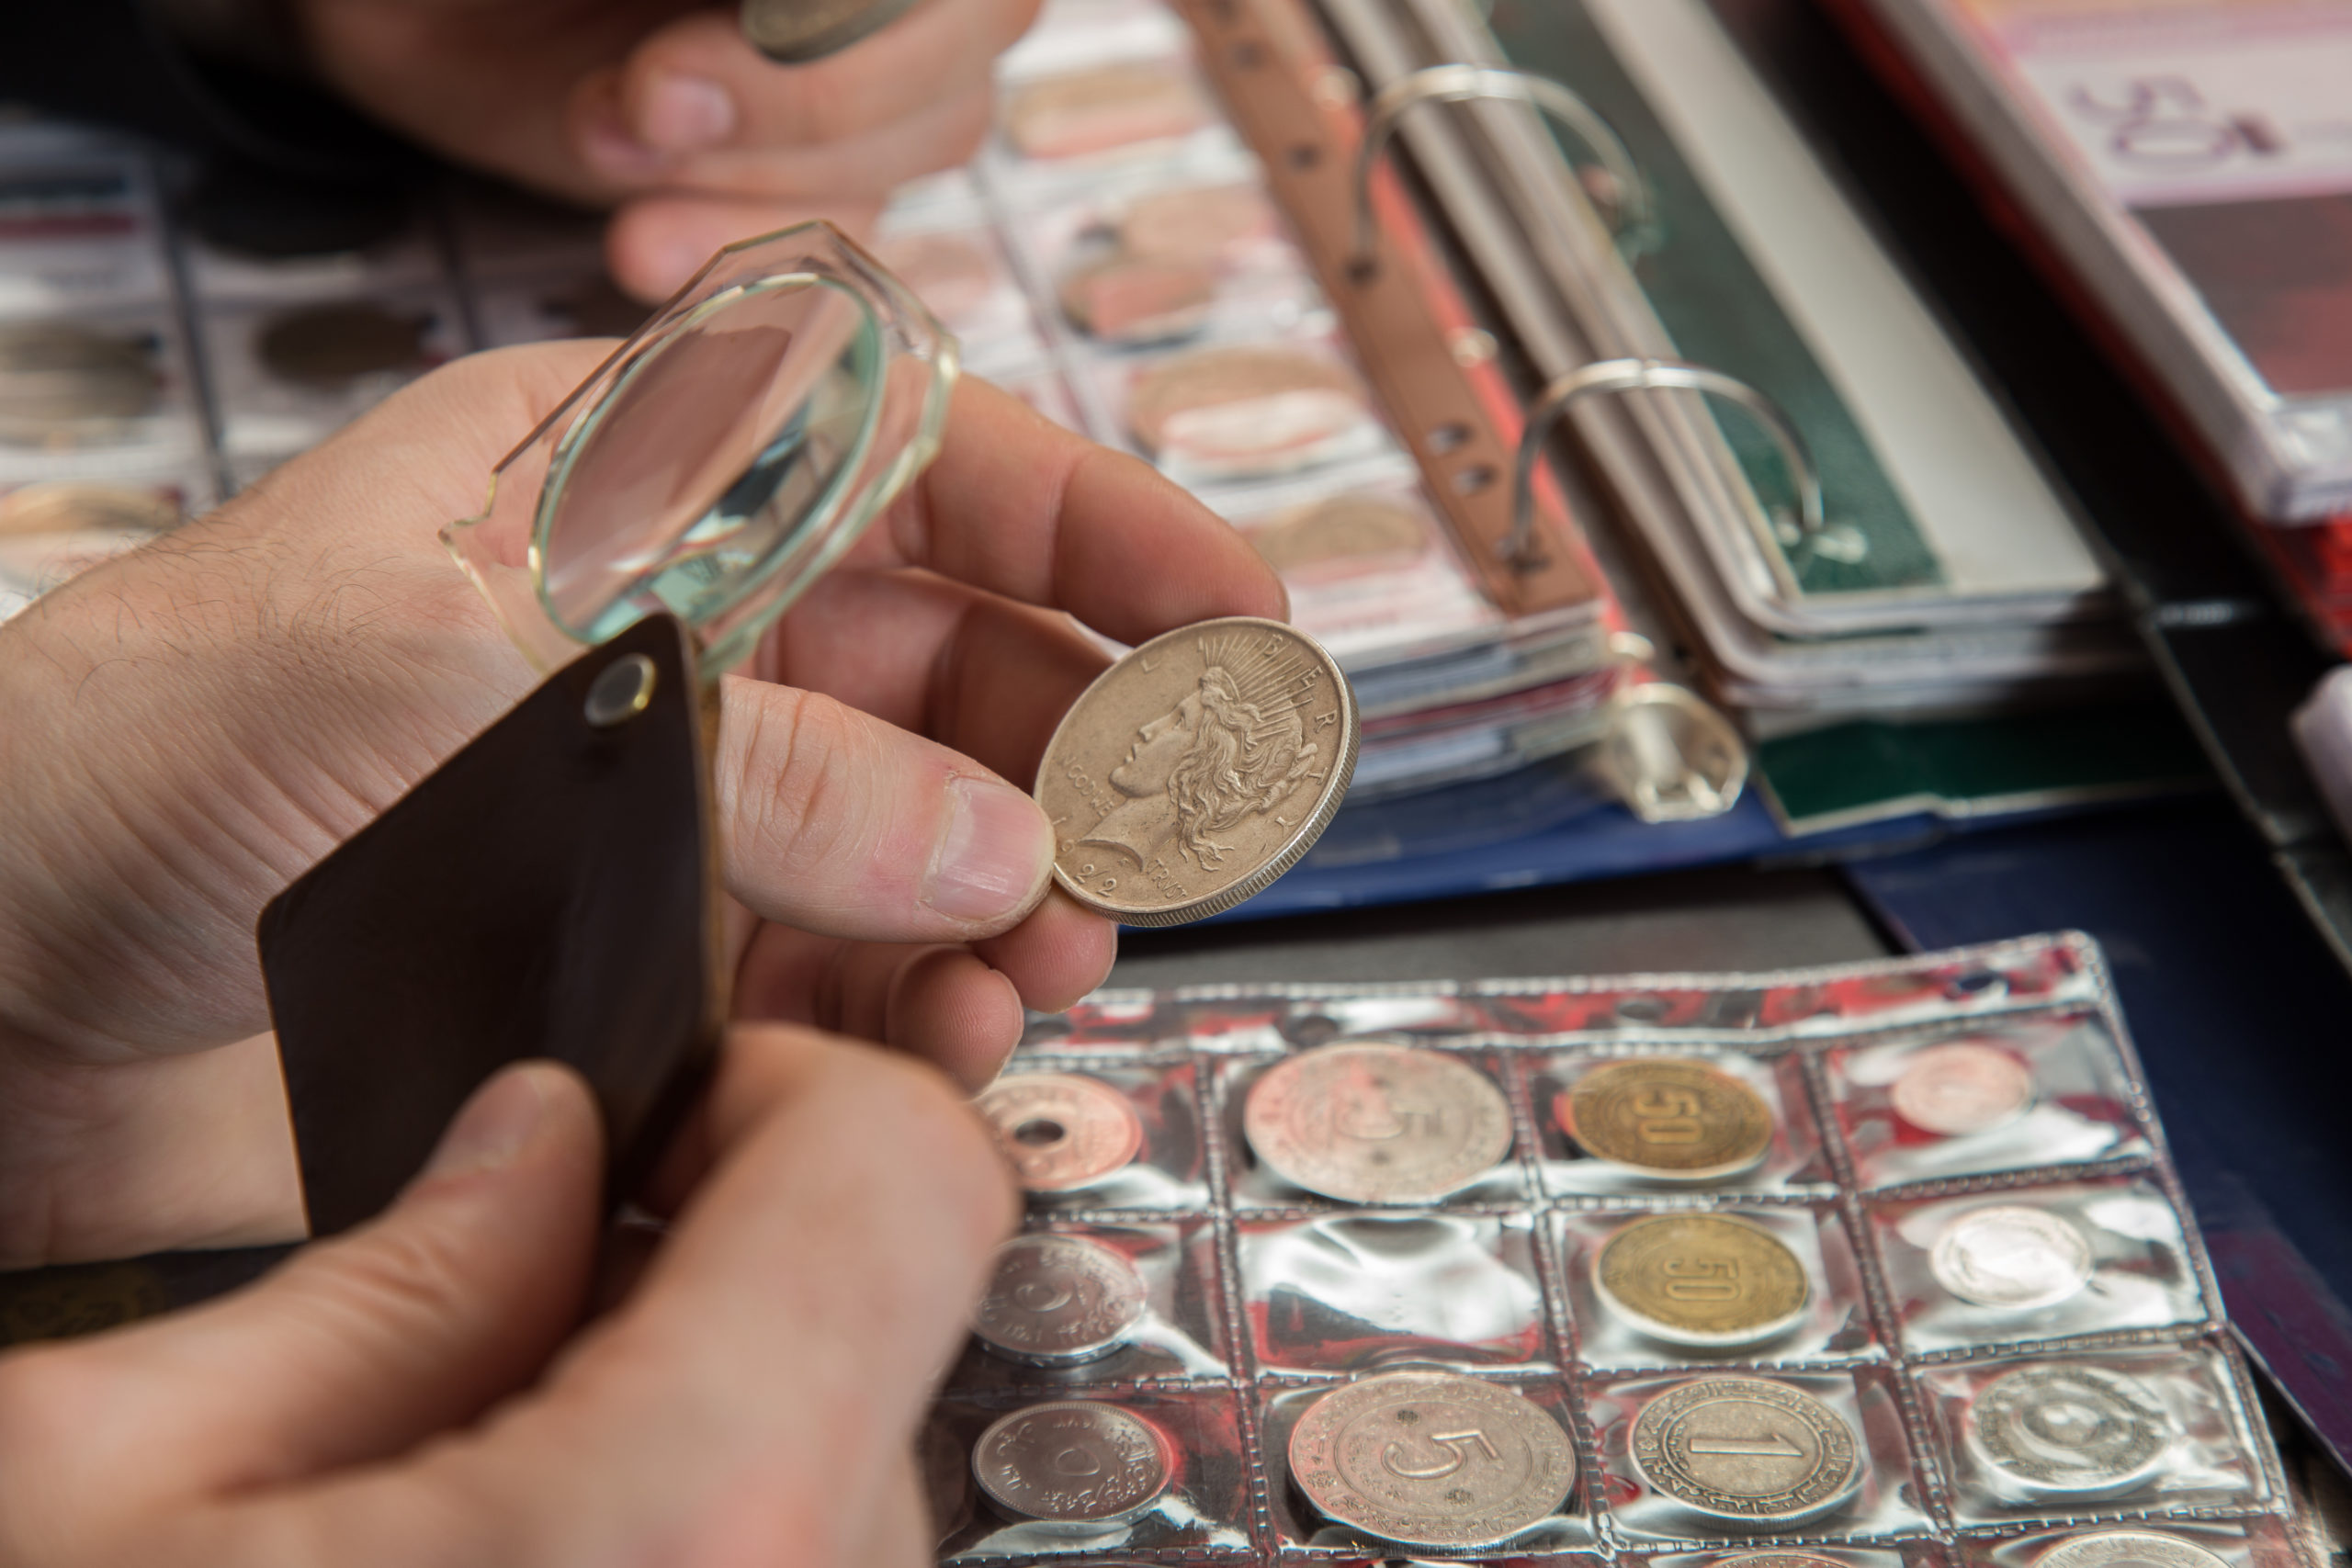 magnify glass being used to inspect a coin